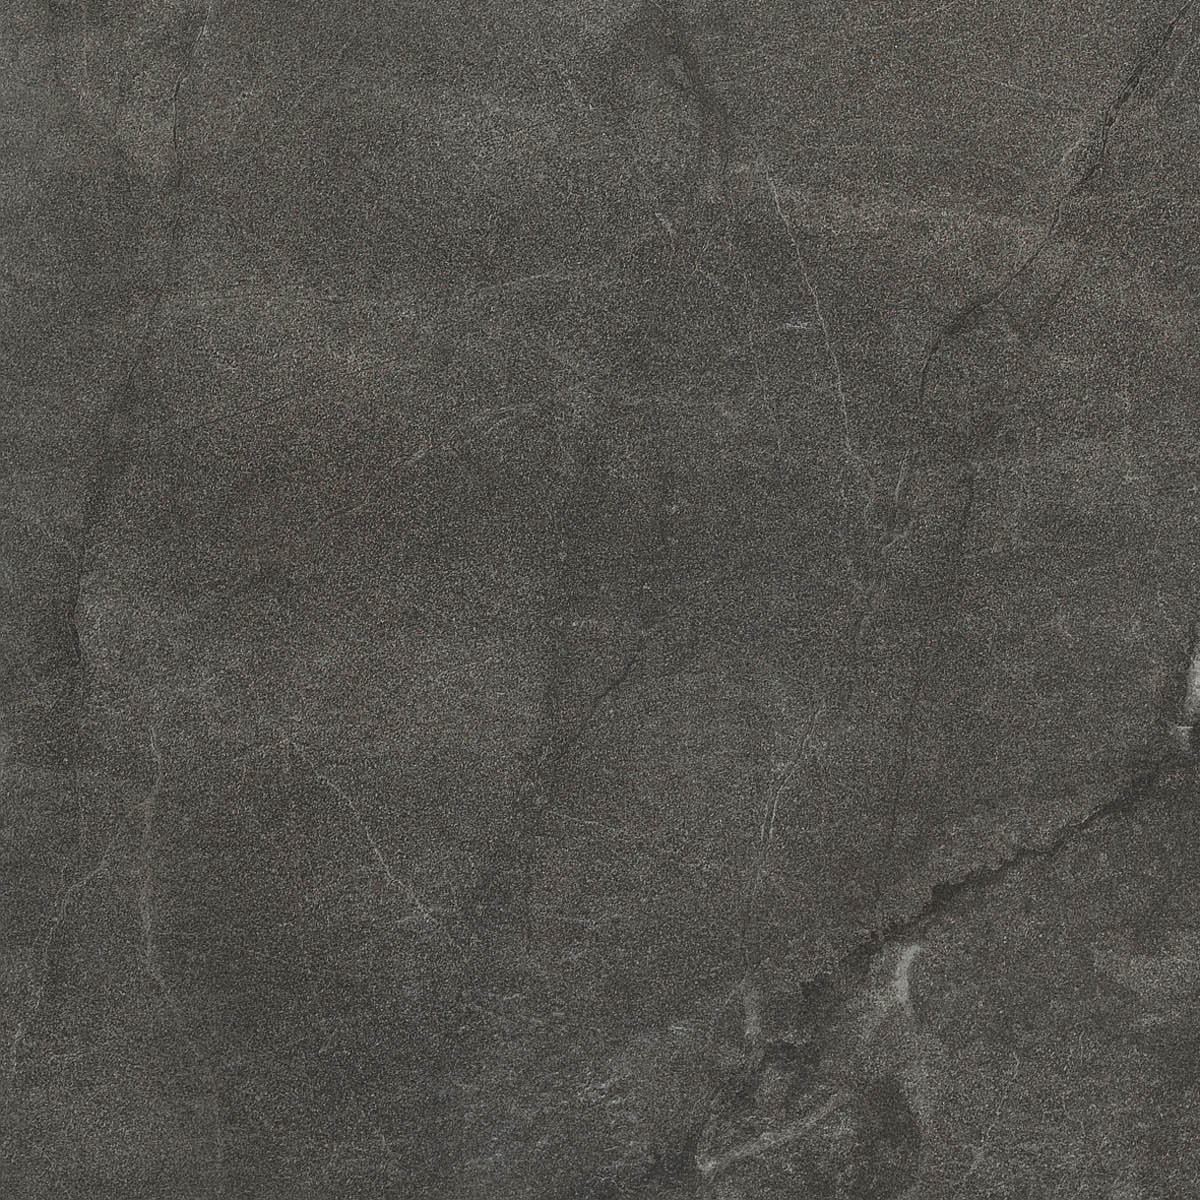 Imola Muse Grigio Scuro Lappato Flat Glossy 149467 60x60cm rectified 10,5mm - MUSE 60DG LP